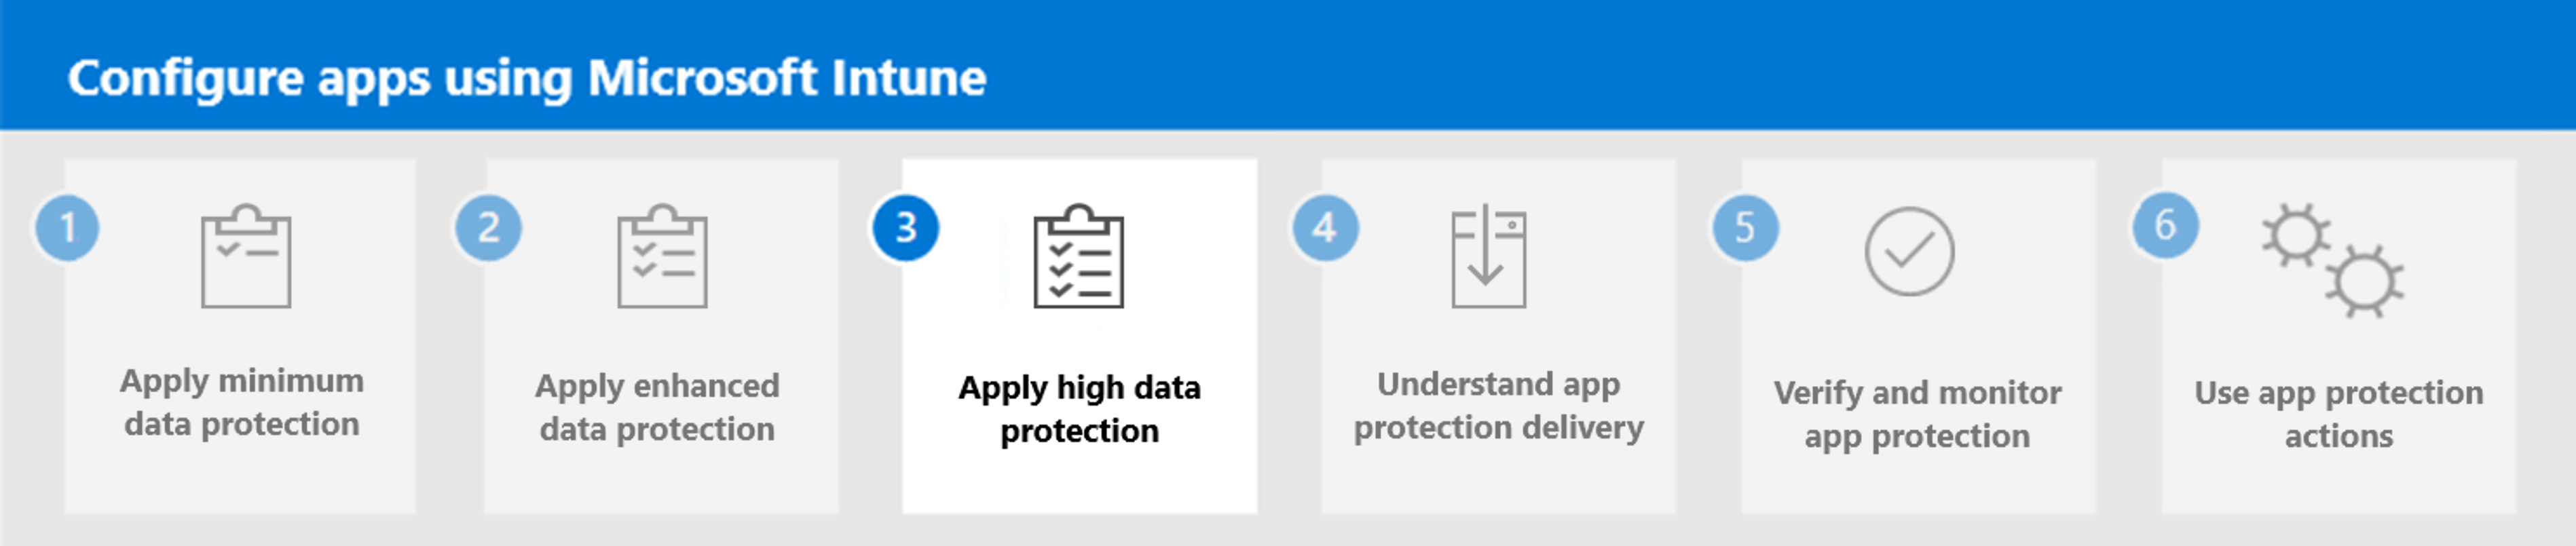 Step 3 - Apply high data protection.